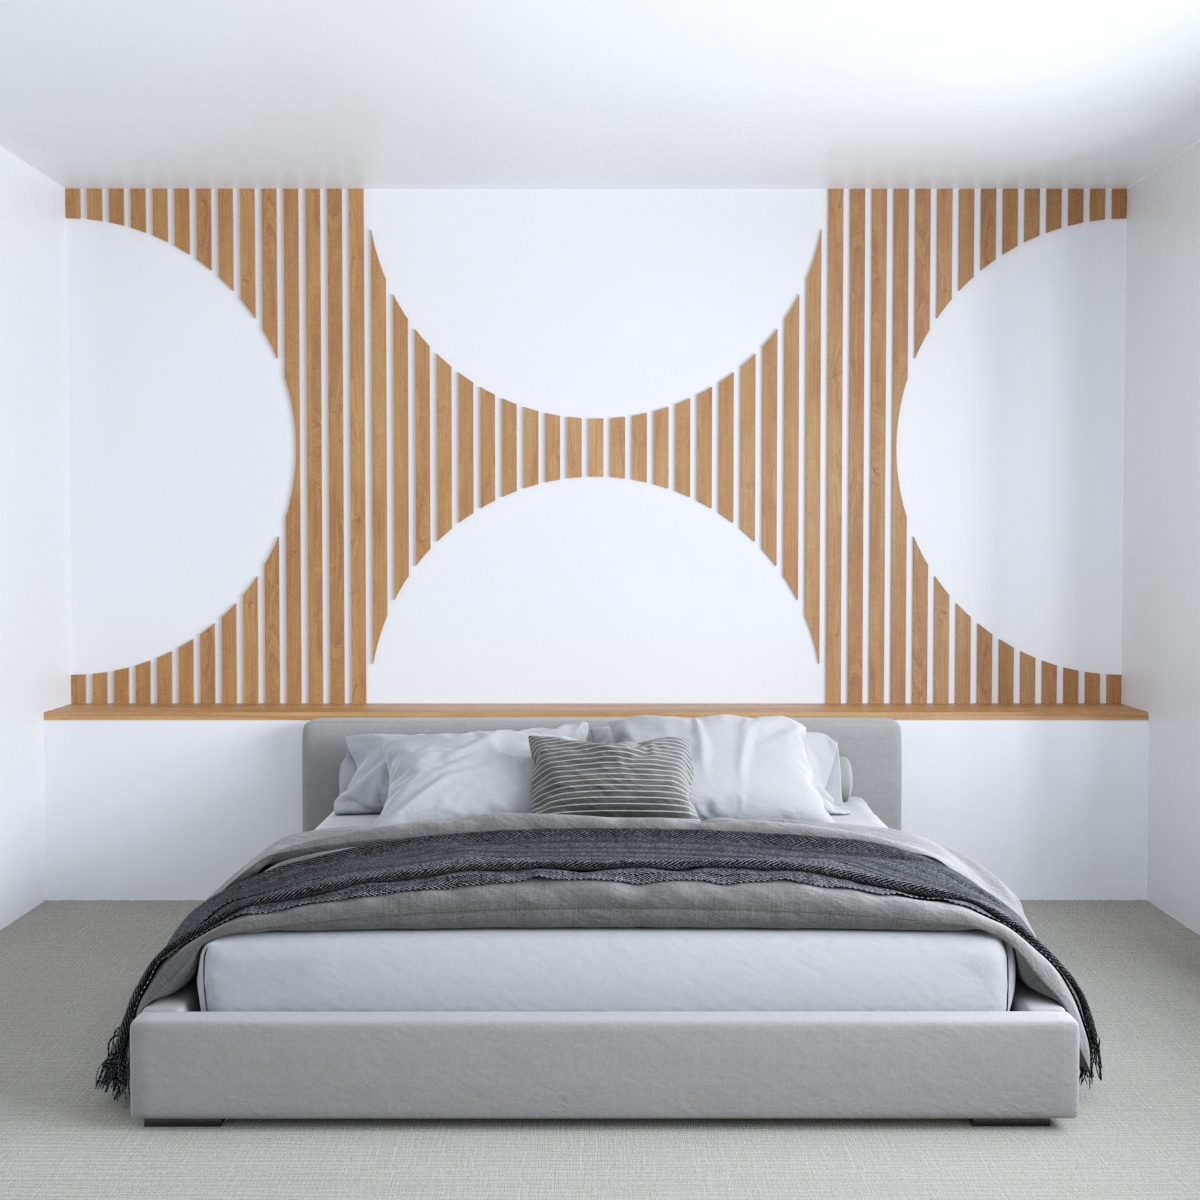 This wood accent wall design includes  4 half circles.